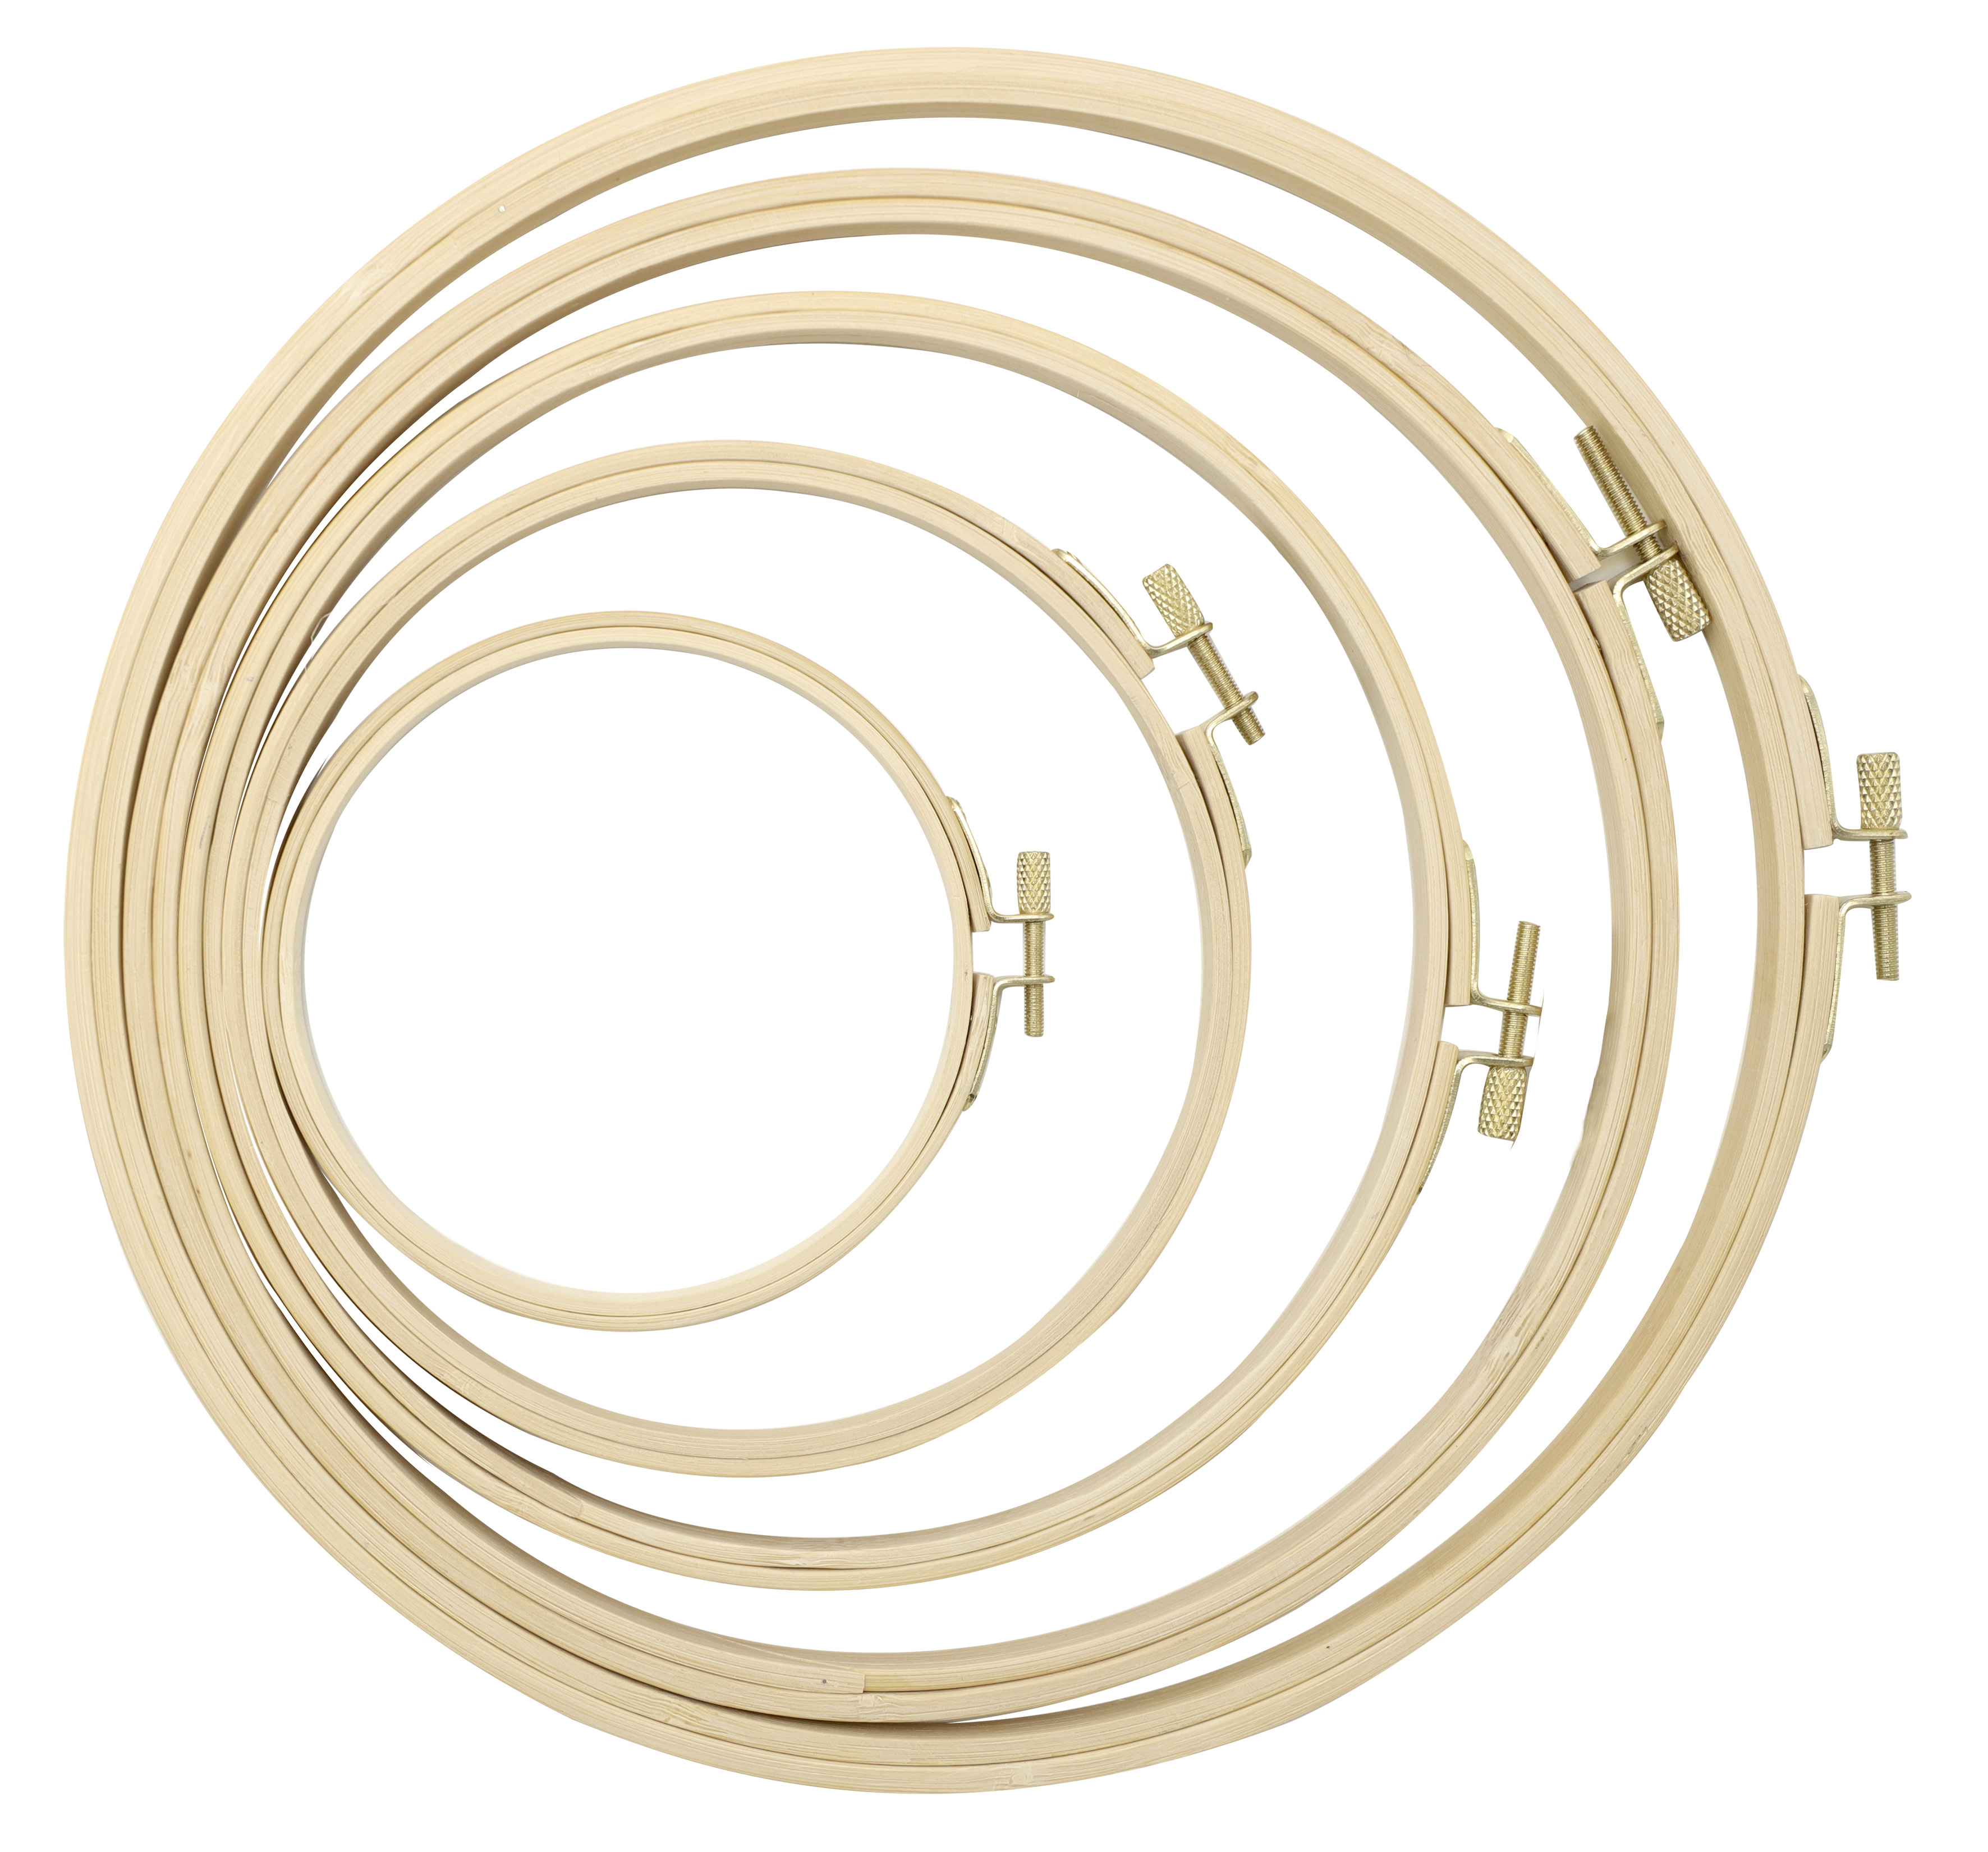 78501 Embroidery Hoops, Bamboo